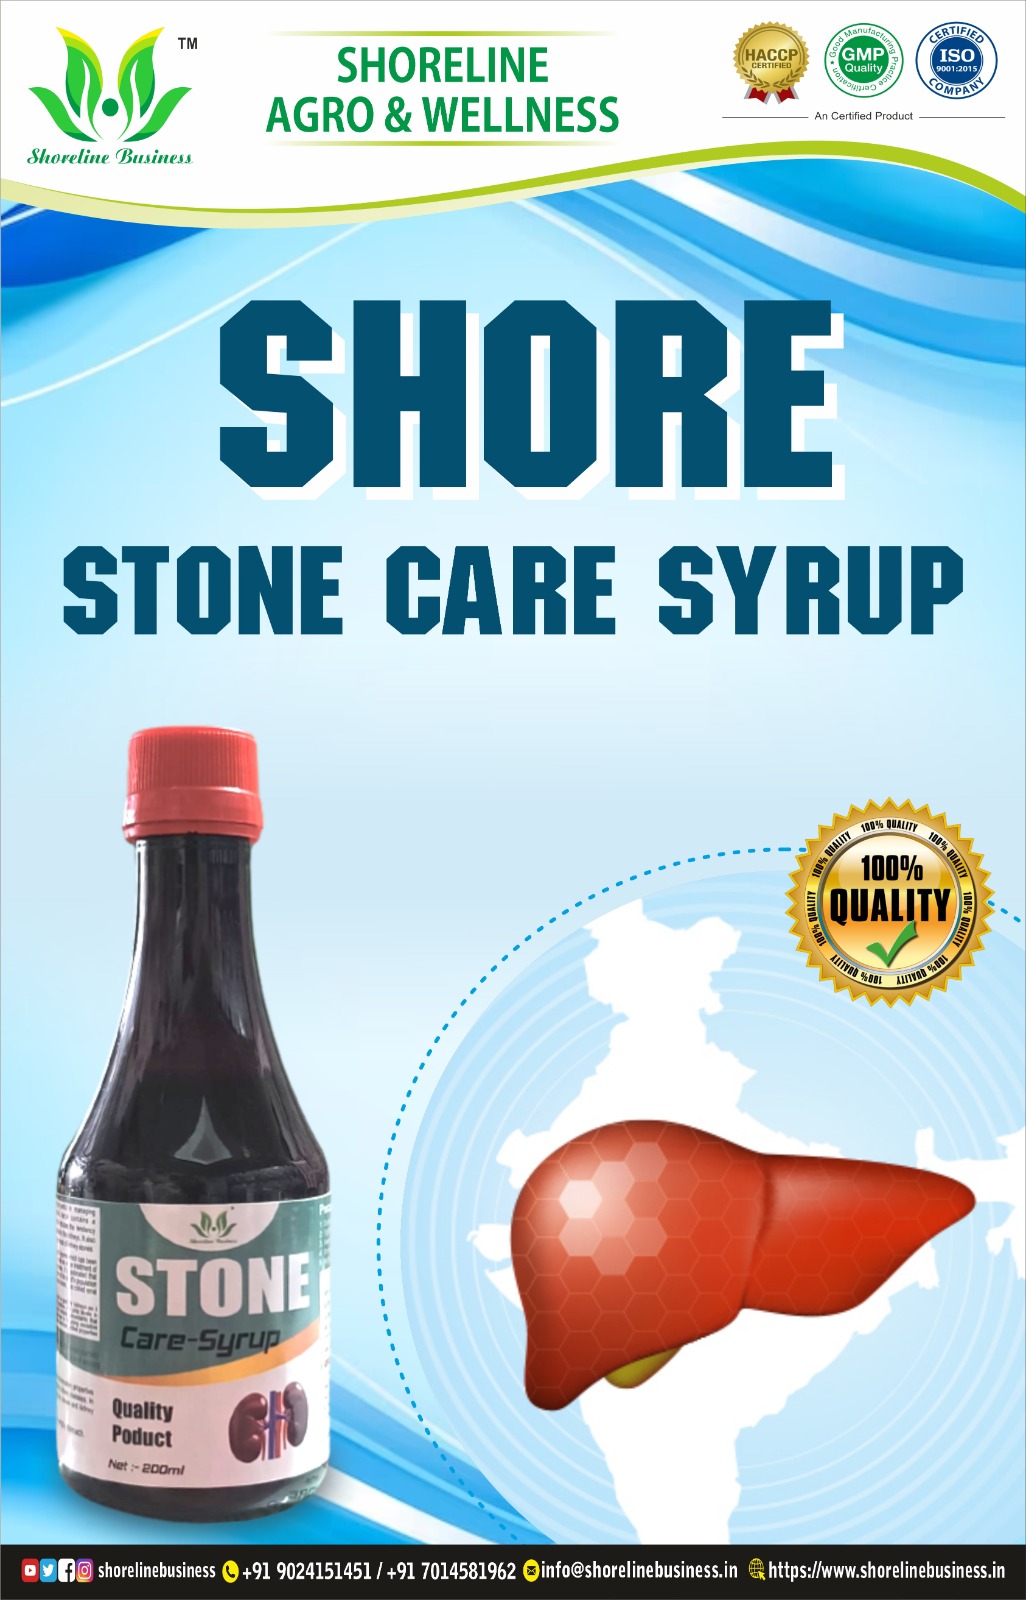 STONE CARE HERBAL SYRUP